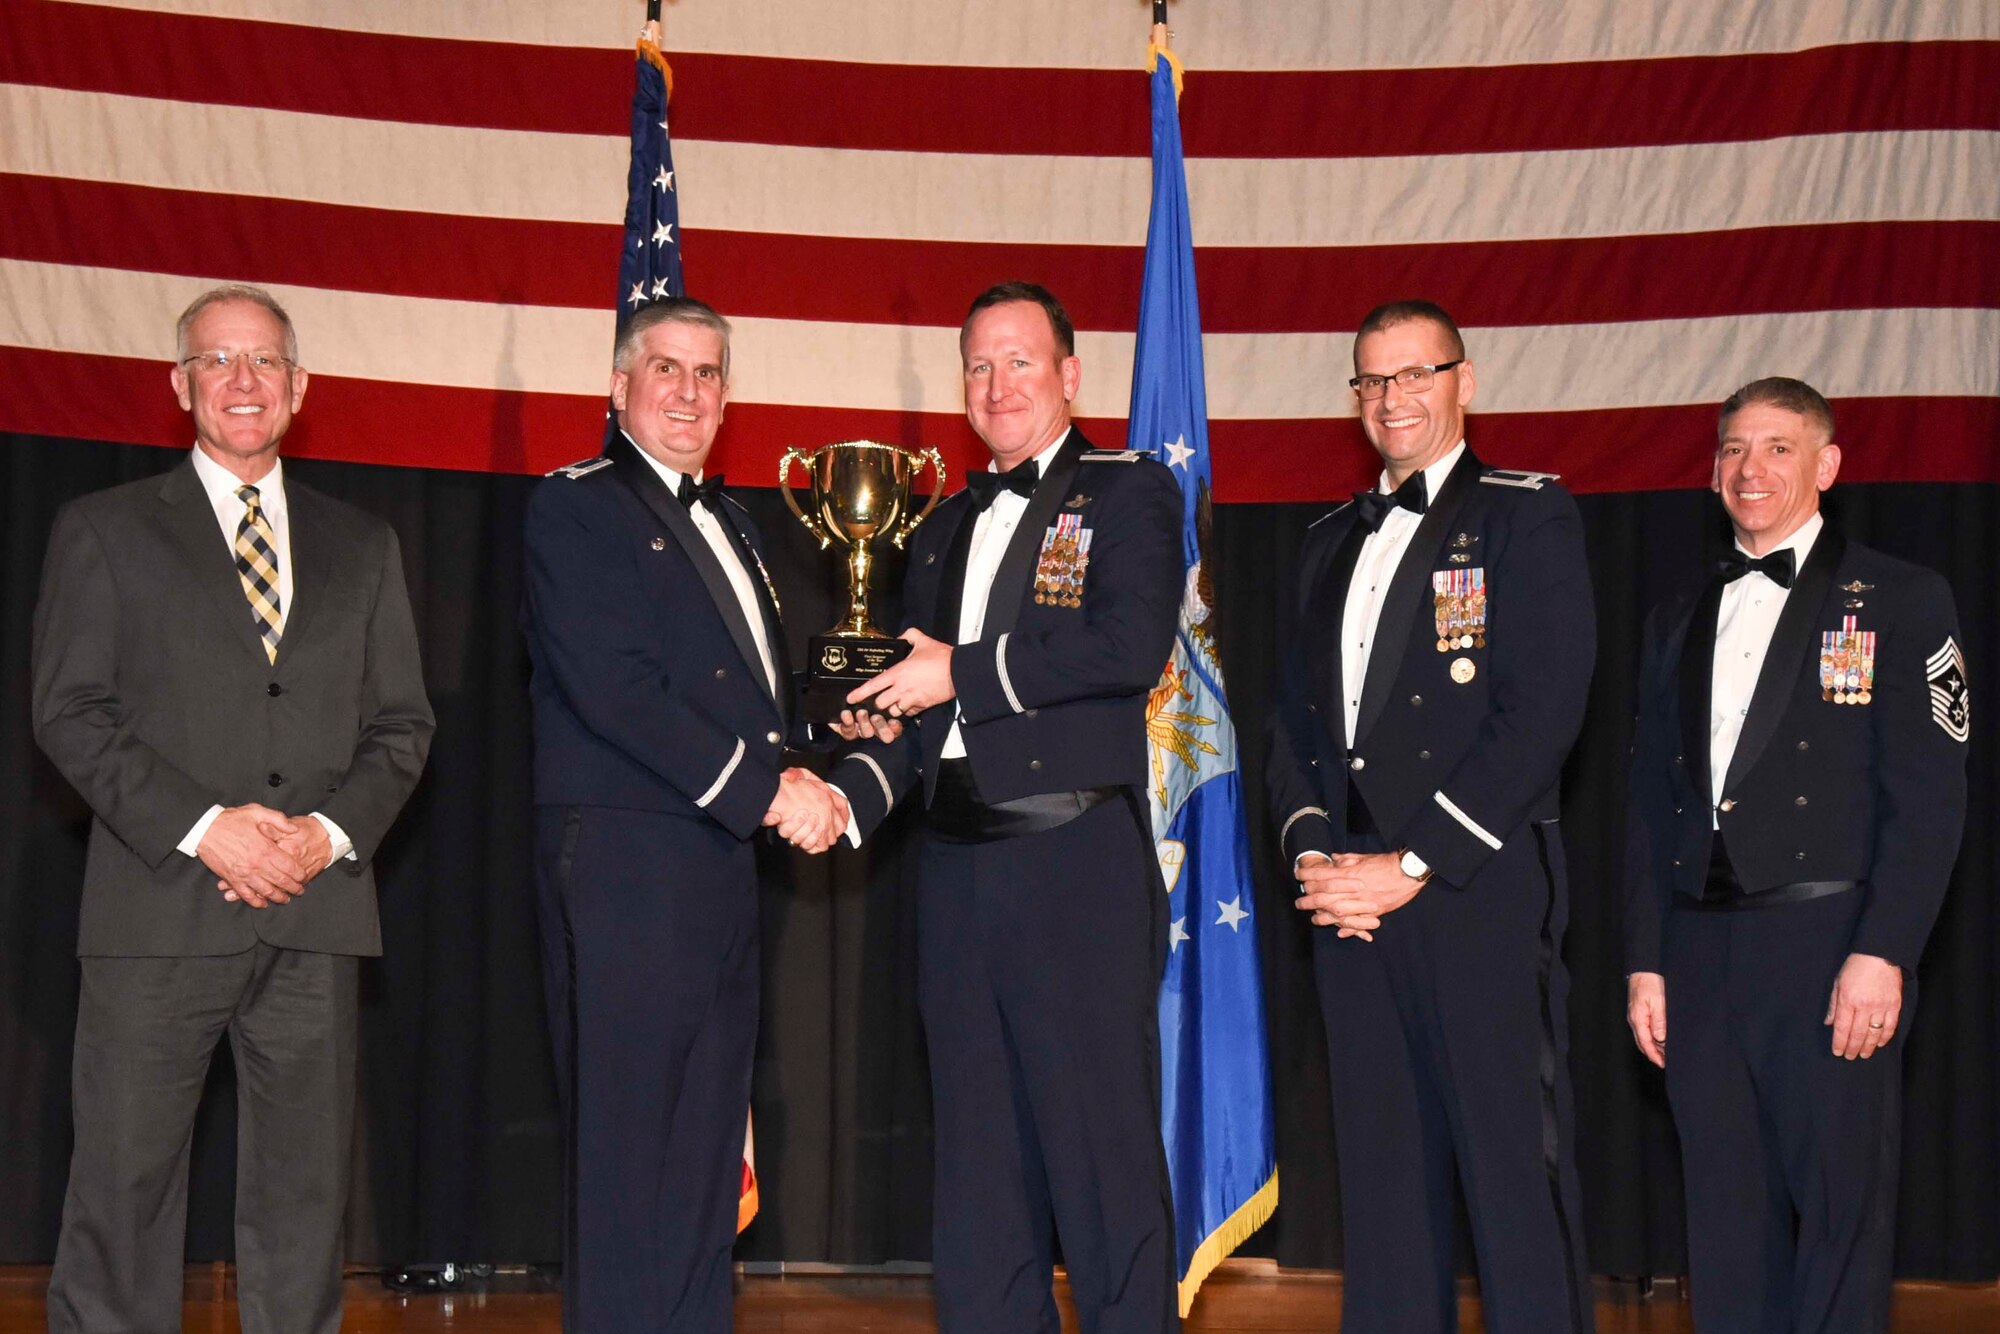 Col. David Lenderman, 22nd Operations Group commander, center, accepts the 2016 First Sergeant of the Year award on behalf of Master Sgt. Jonathan H. Bailey, 64th Air Refueling Squadron, Feb. 3, 2017, at McConnell Air Force Base, Kan. The annual awards ceremony recognized military and civilian members who excel in their areas of responsibilities, leadership qualities, community involvement, self-improvement and innovation from January to December 2016. (U.S. Air Force photo/Senior Airman Christopher Thornbury)